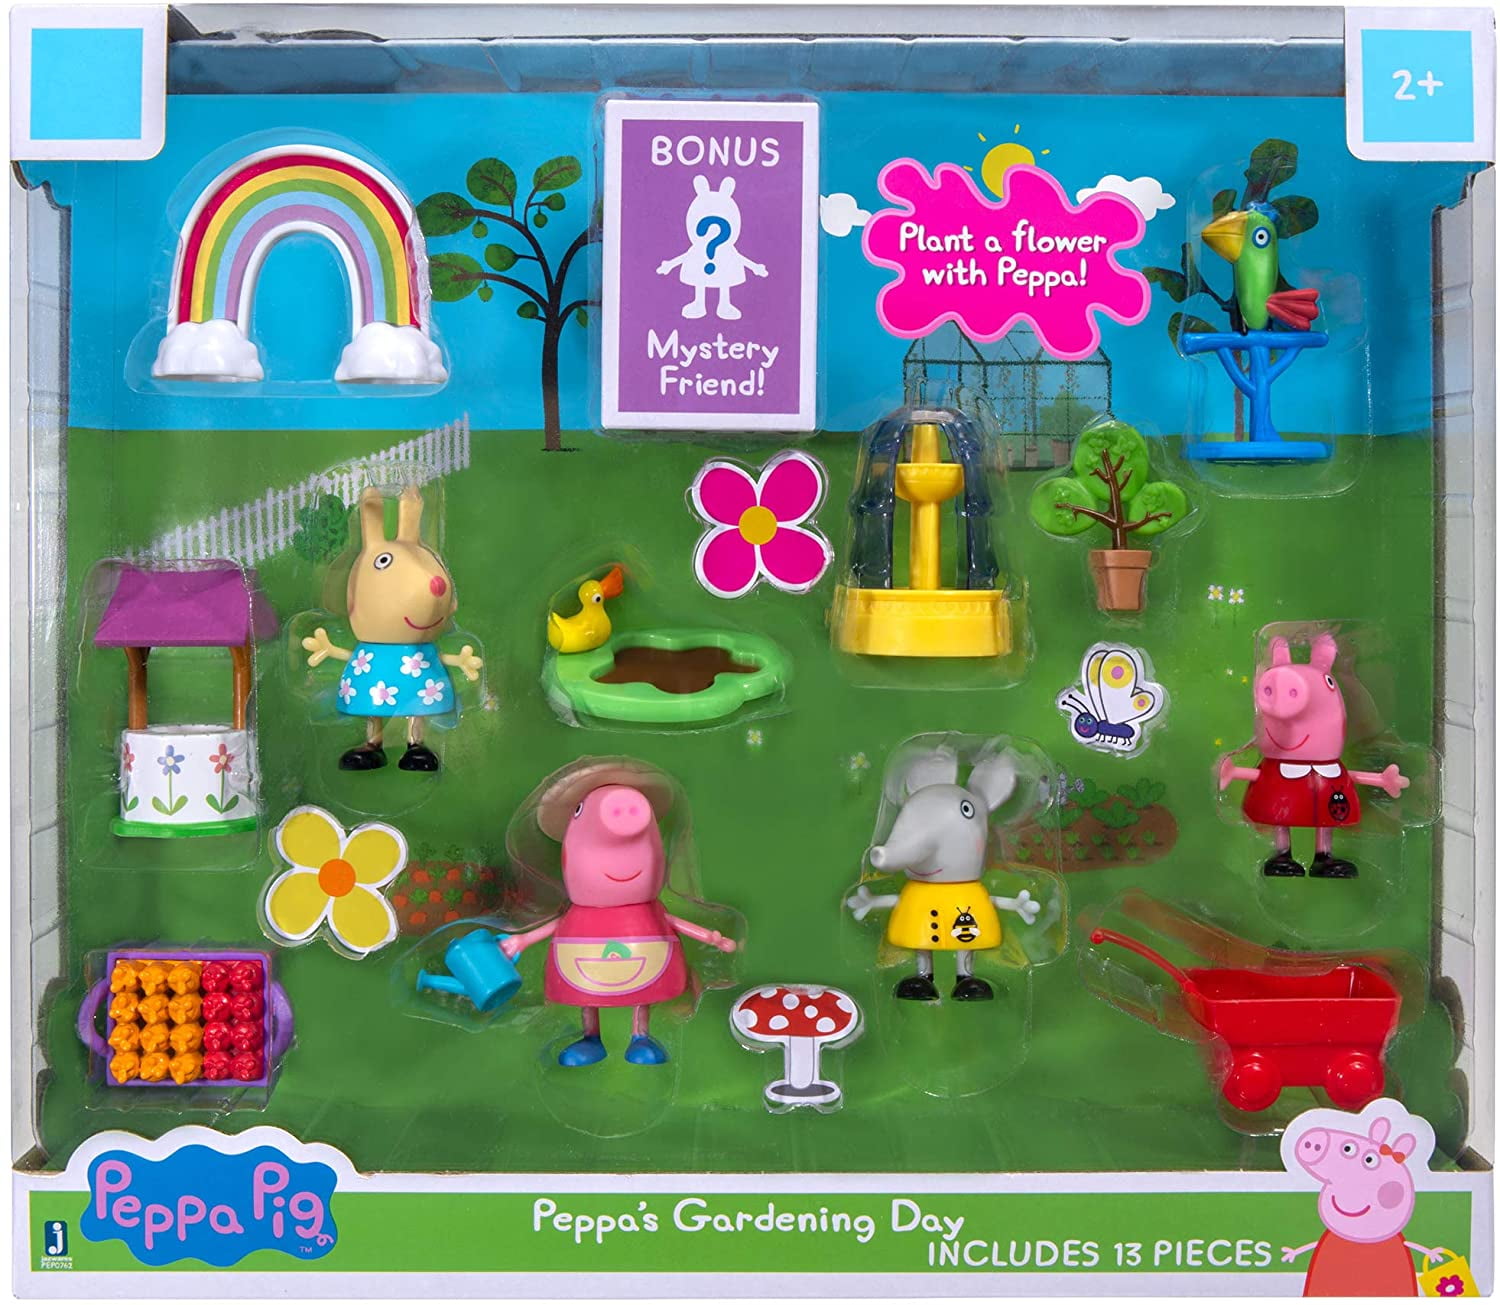 Peppa Pig Gardening Deluxe Playtime Set, Featuring Peppa Pig Characters, a  Surprise Friend Figure, and Garden Accessories from The World of Peppa Pig 